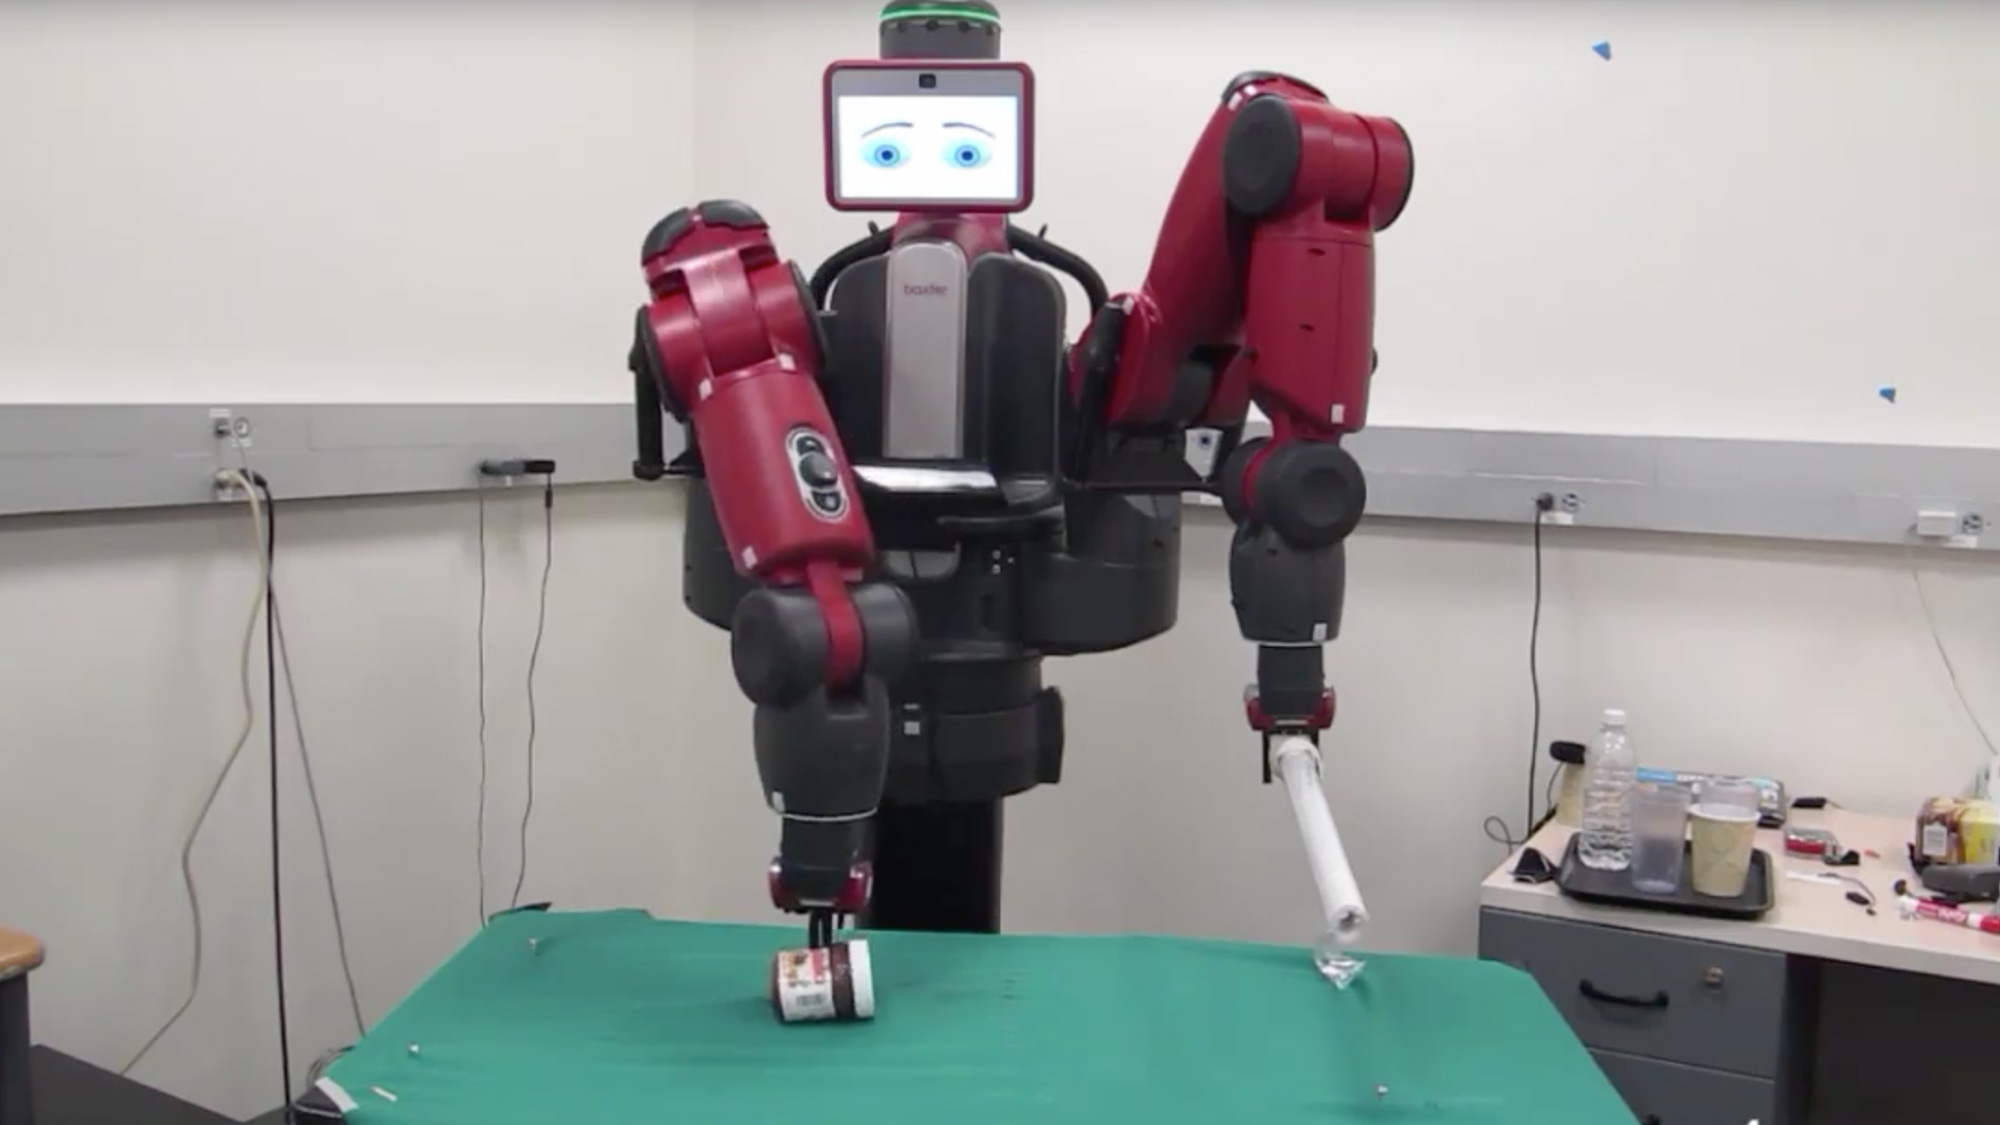 Researchers at UC Berkeley are working with a machine from Rethink Robotics to help AI gain an understanding of how objects in the real world can be manipulated.